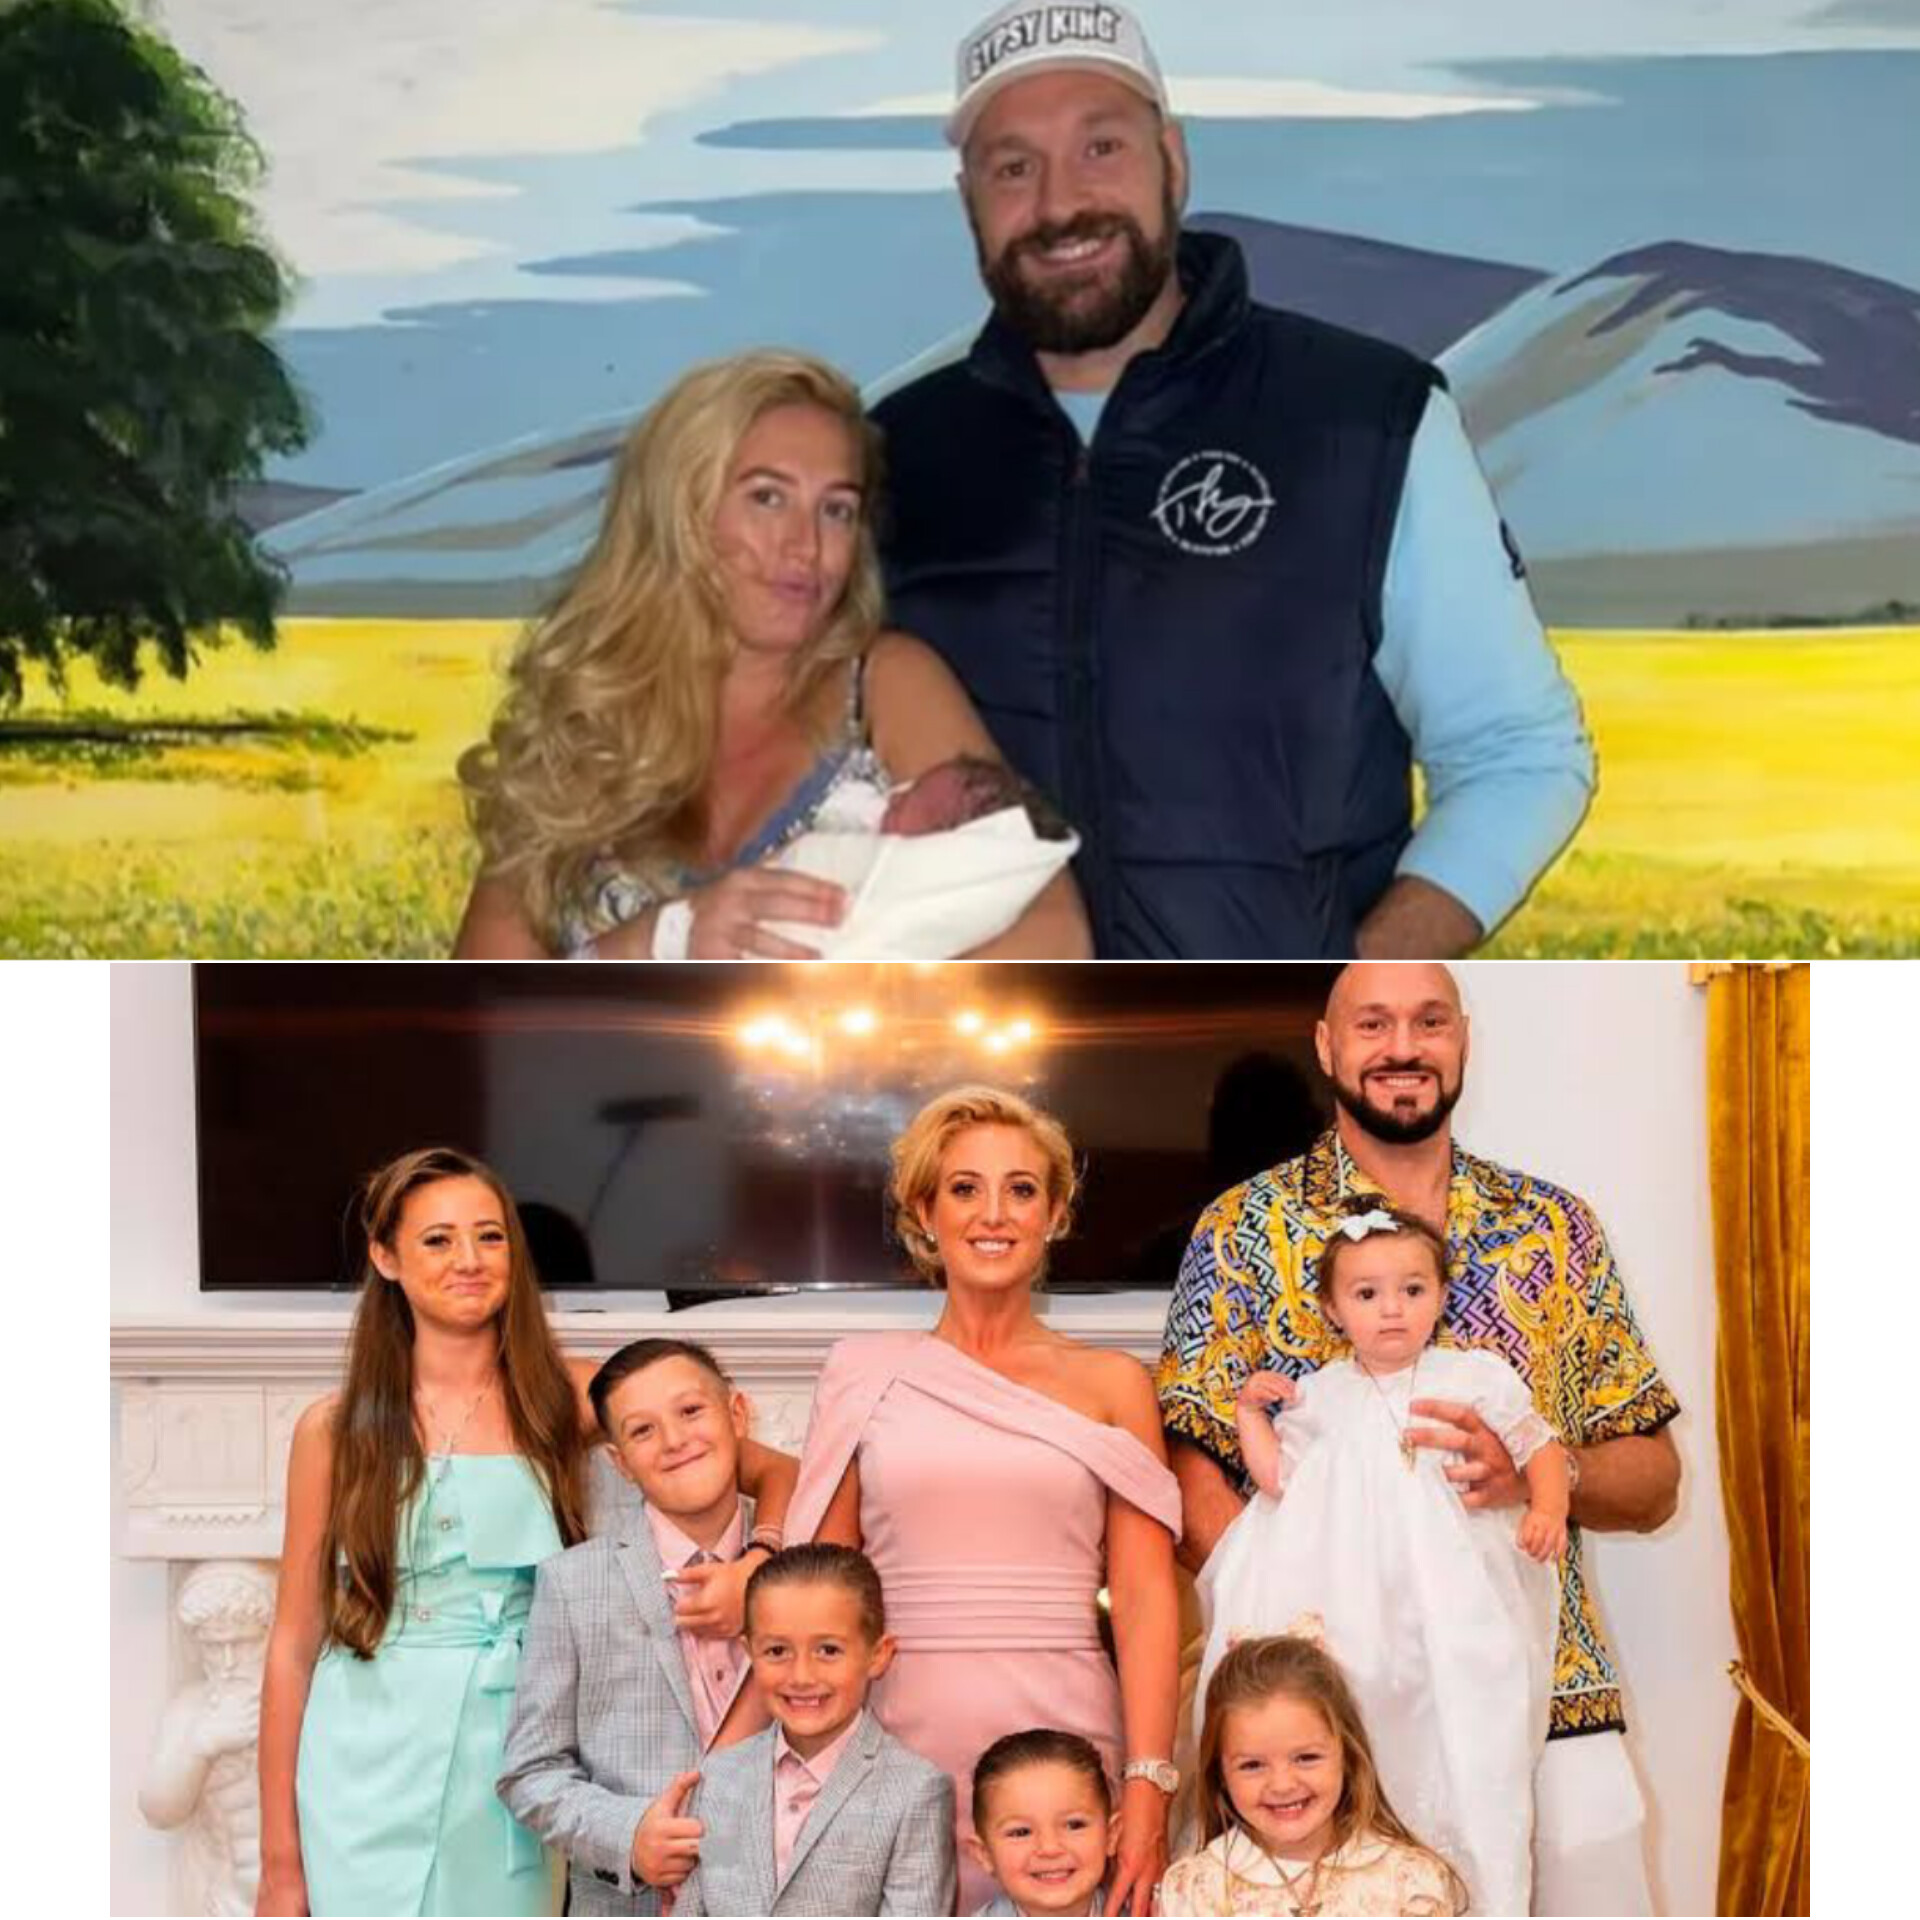 HE’S HERE AND HE’S PERFECT’- BOXING CHAMPION TYSON FURY ANNOUNCES BIRTH OF HIS 7TH CHILD